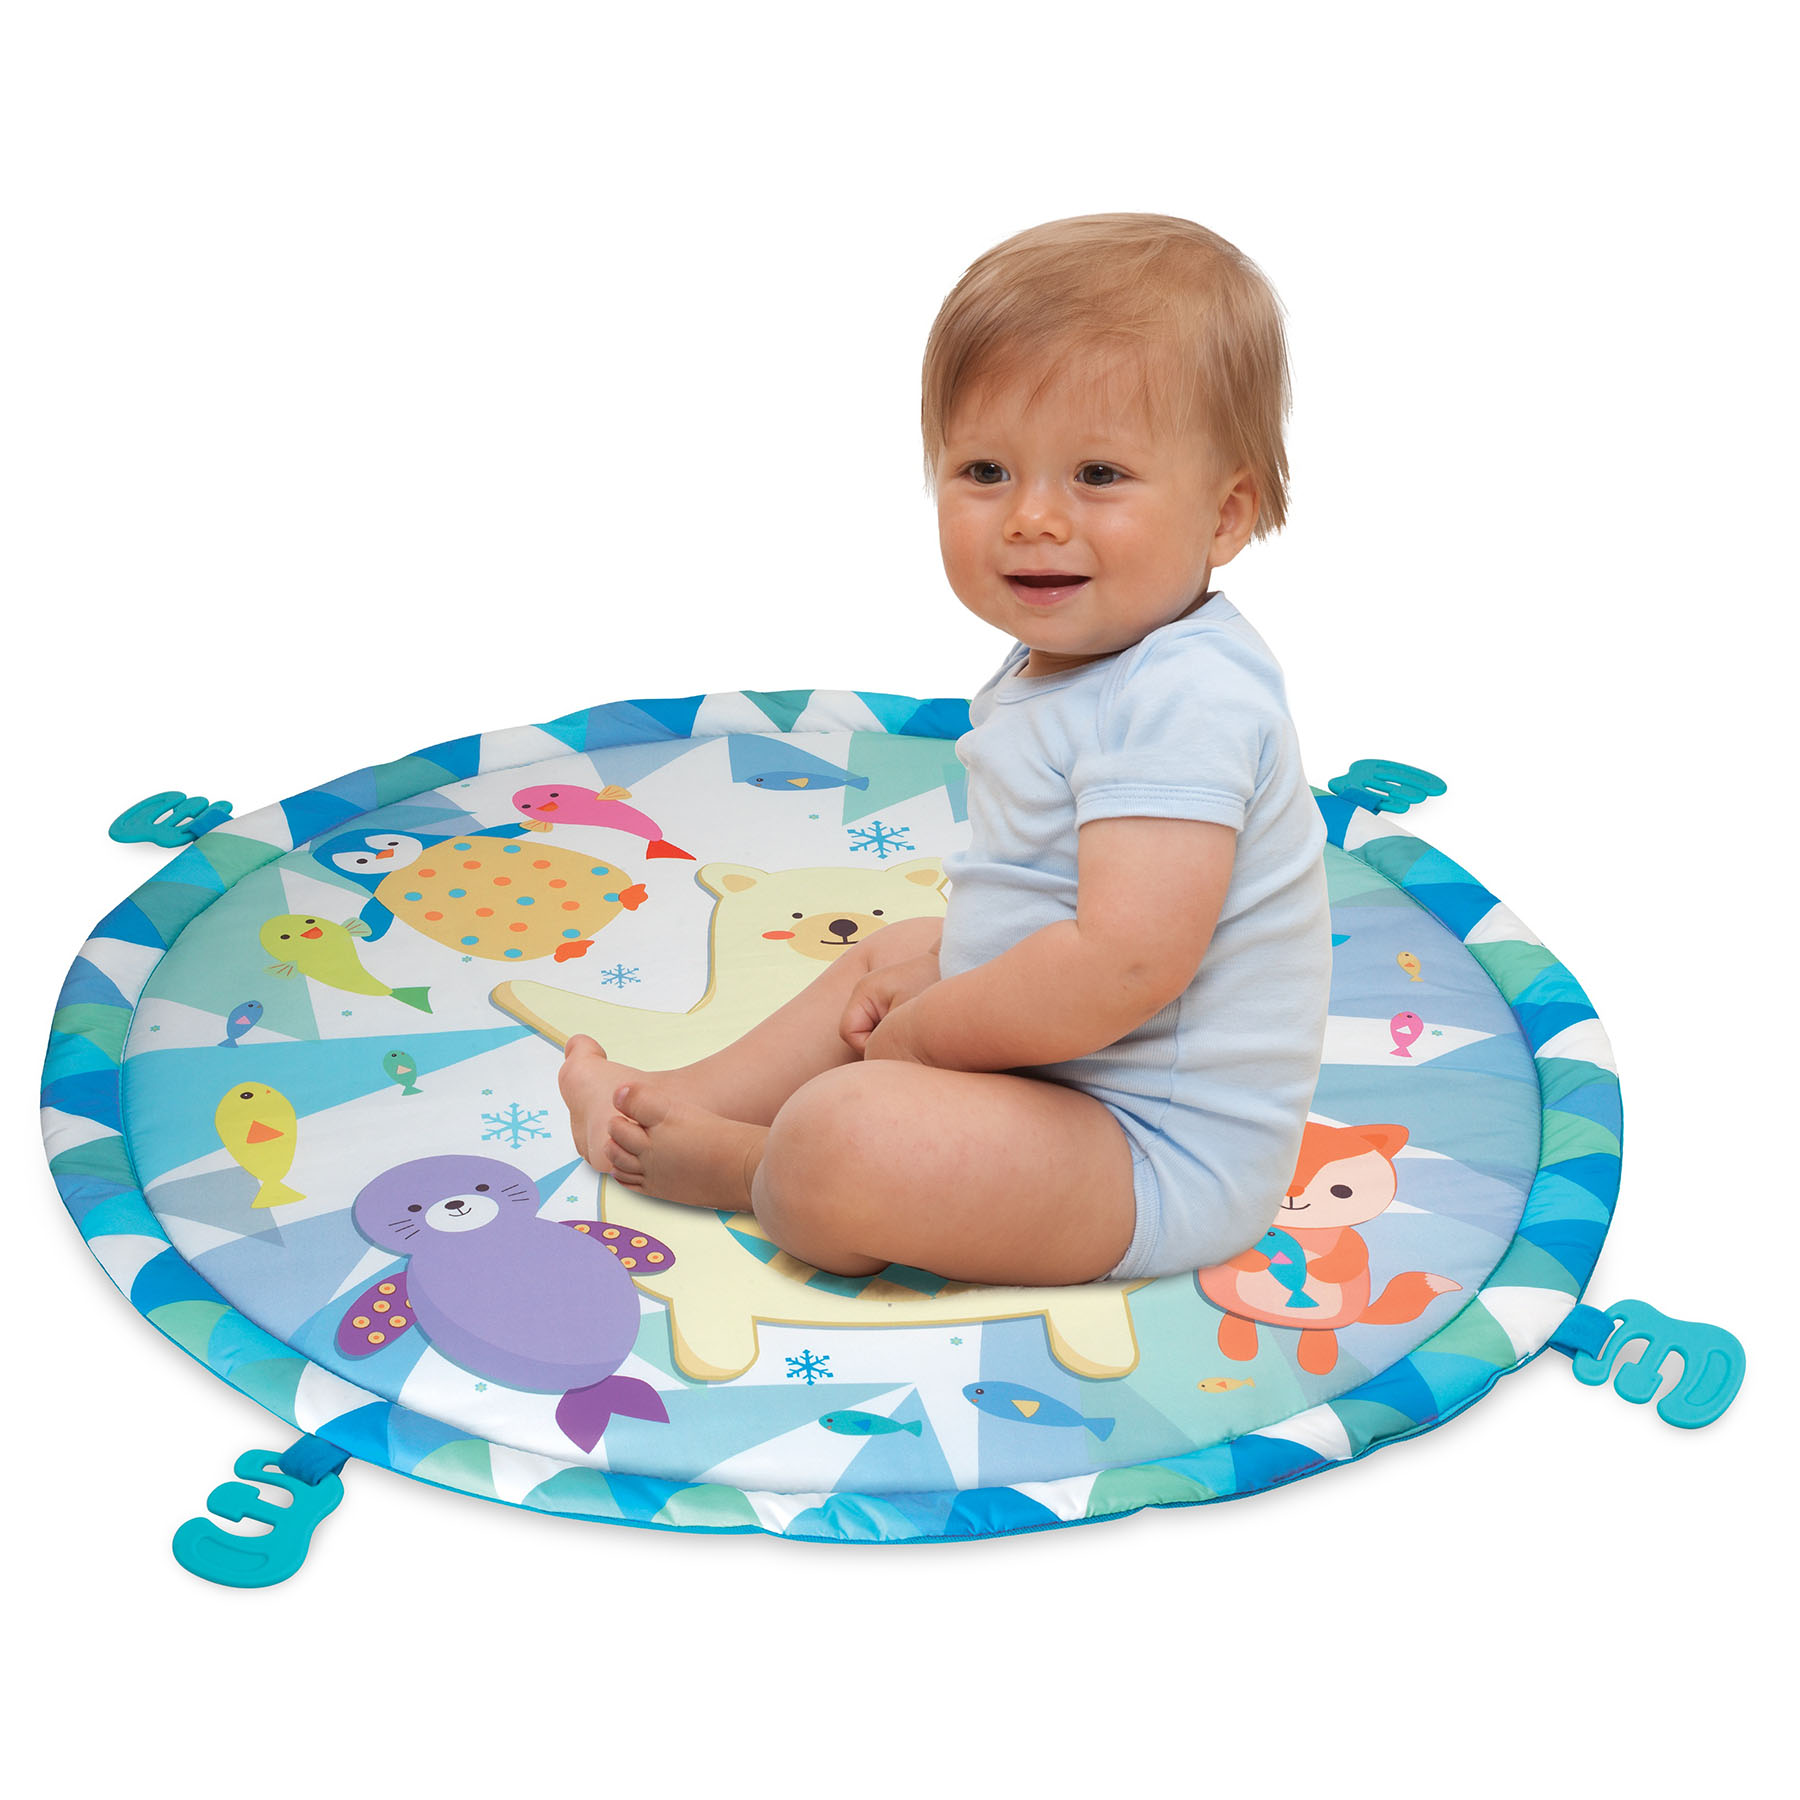 Little Virtuoso Neptune's Infant Playmat  With Lights, Sounds and Music  (Newborn to 2 Years) - image 3 of 6